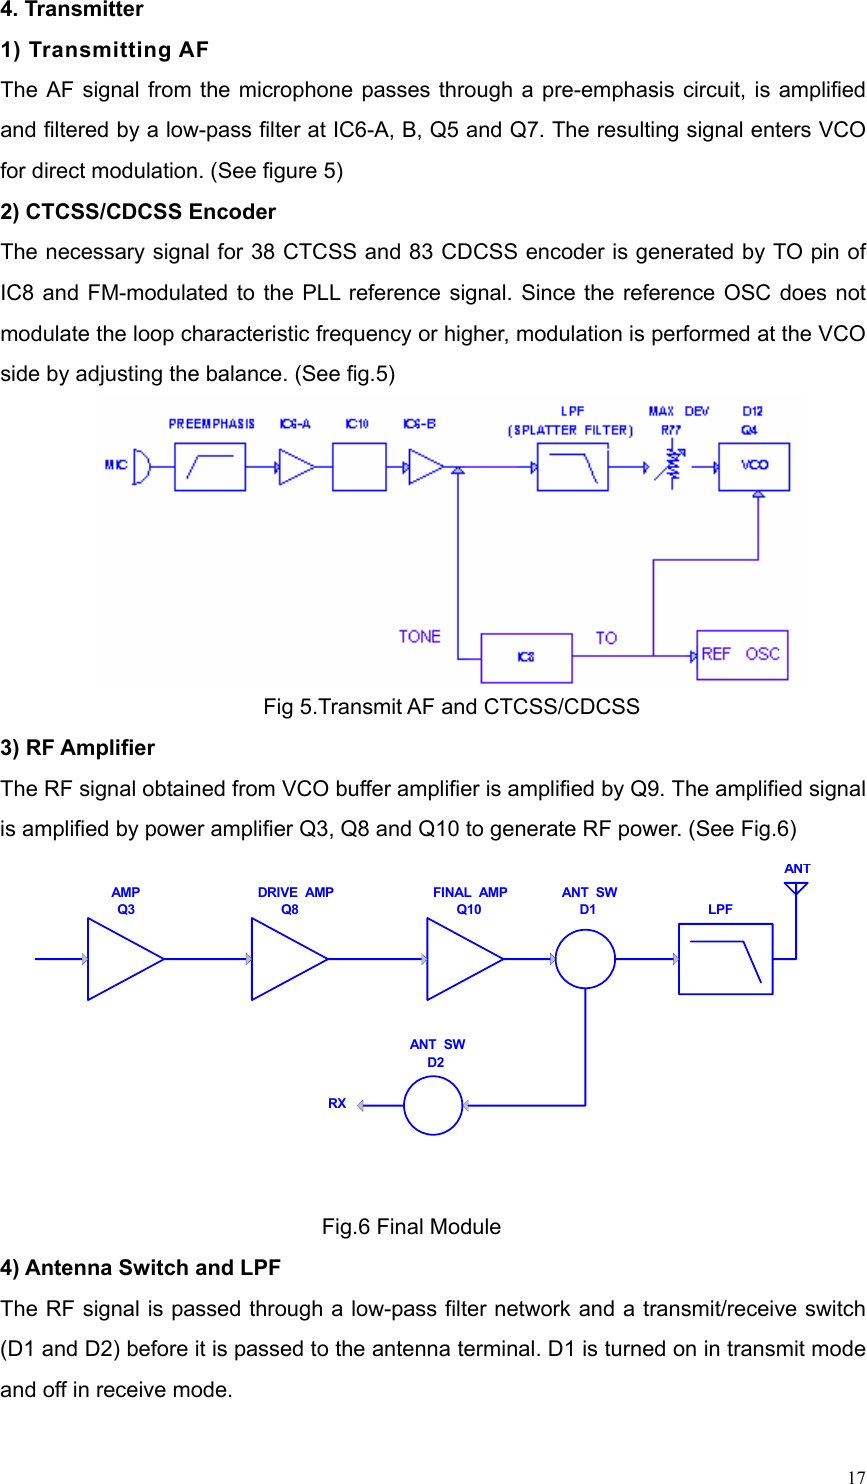   174. Transmitter 1) Transmitting AF The AF signal from the microphone passes through a pre-emphasis circuit, is amplified and filtered by a low-pass filter at IC6-A, B, Q5 and Q7. The resulting signal enters VCO for direct modulation. (See figure 5) 2) CTCSS/CDCSS Encoder                         The necessary signal for 38 CTCSS and 83 CDCSS encoder is generated by TO pin of IC8 and FM-modulated to the PLL reference signal. Since the reference OSC does not modulate the loop characteristic frequency or higher, modulation is performed at the VCO side by adjusting the balance. (See fig.5)  Fig 5.Transmit AF and CTCSS/CDCSS 3) RF Amplifier The RF signal obtained from VCO buffer amplifier is amplified by Q9. The amplified signal is amplified by power amplifier Q3, Q8 and Q10 to generate RF power. (See Fig.6) BCCBAMPQ3DRIVE  AMPQ8FINAL  AMPQ10ANT  SWD1 LPFANTANT  SWD2RX Fig.6 Final Module 4) Antenna Switch and LPF The RF signal is passed through a low-pass filter network and a transmit/receive switch (D1 and D2) before it is passed to the antenna terminal. D1 is turned on in transmit mode and off in receive mode. 